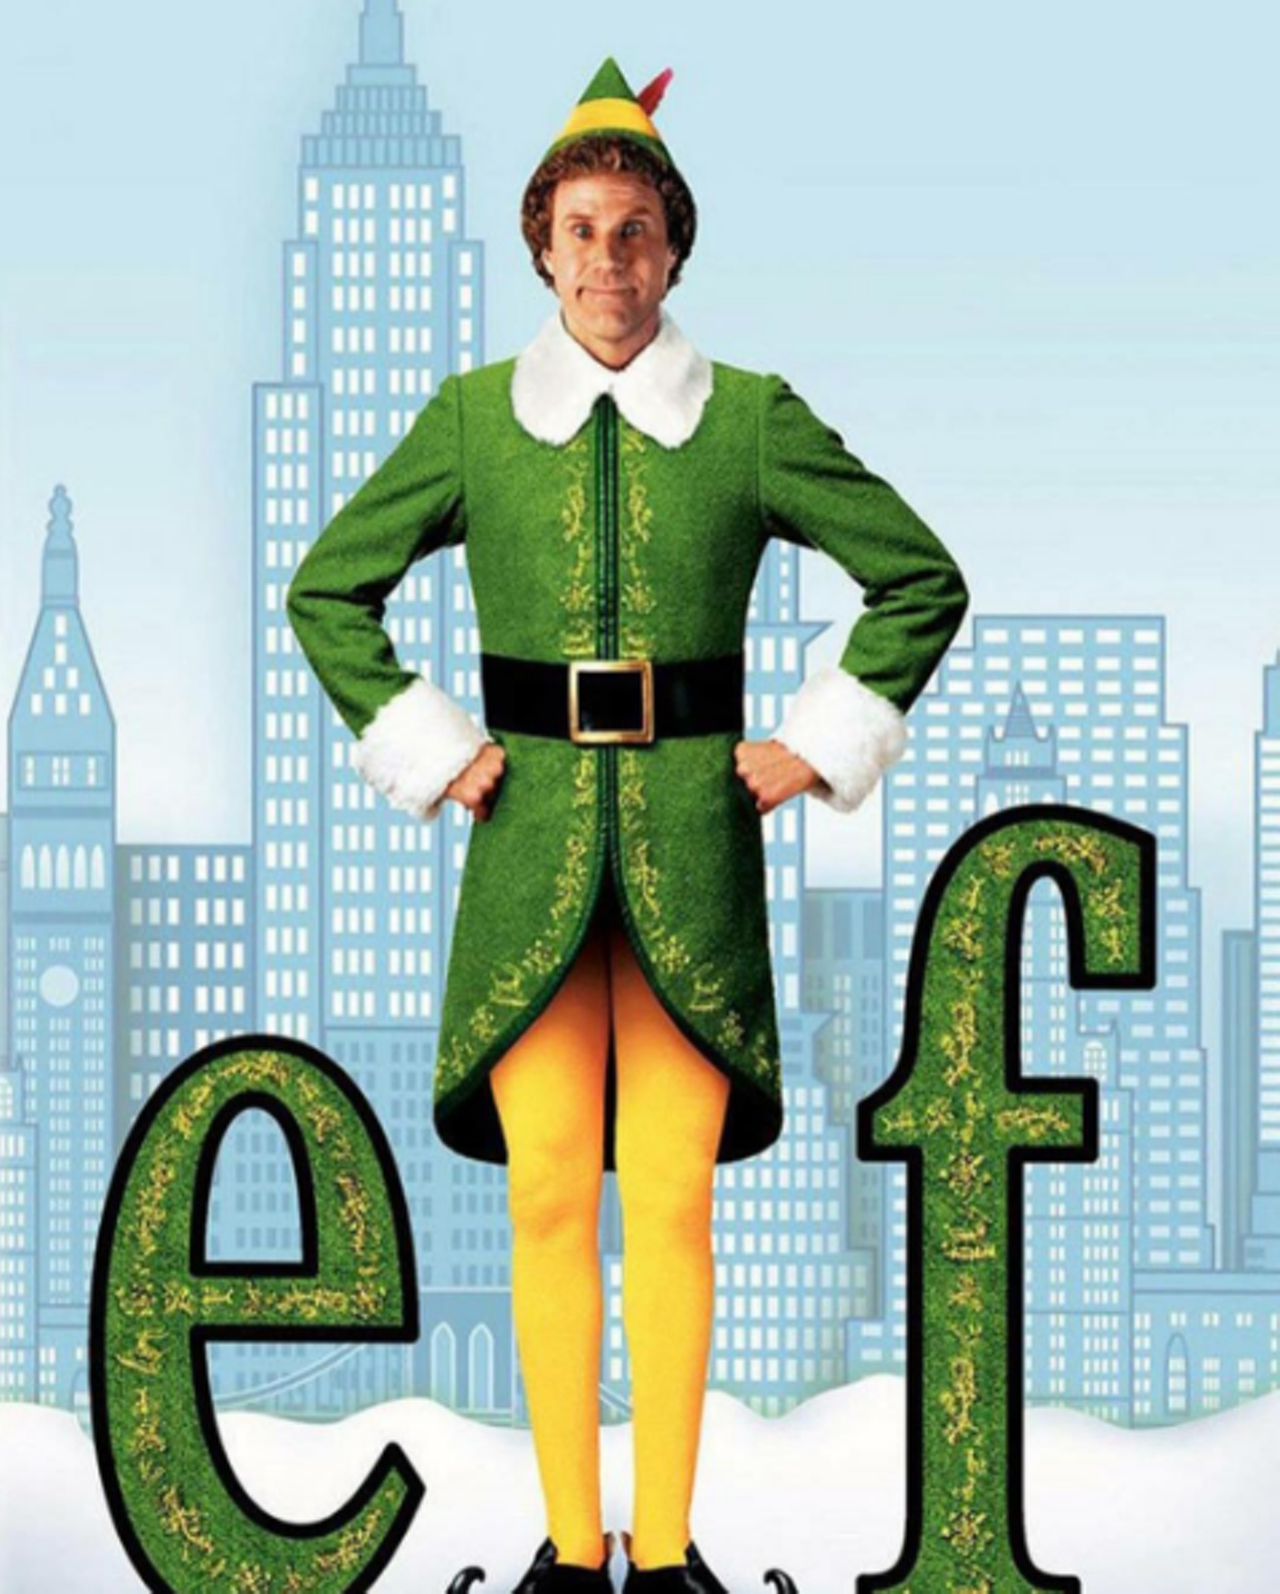 Sunday, 12/4
Elf
@ The Michigan Theater
If you like to smile, if smiling is your favorite, then you&#146;ll be beaming once you hear about this free showing of Elf! Instantly a Christmas favorite after its 2004 release, Will Ferrell, Bob Newhart, and Zooey Deschanel will make you giggle pretty profusely. It&#146;s not often that you get the chance to see it on the silver screen anymore, so this is the perfect opportunity to take it in at its finest all over again, since it is part of the theater's Holiday Classic Series. Don&#146;t let any arctic puffins interrupt you while you&#146;re trying to get a group to go!
Show starts at 1:30 p.m.; 603 E. Liberty St., Ann Arbor; michtheater.org; Admittance is free.